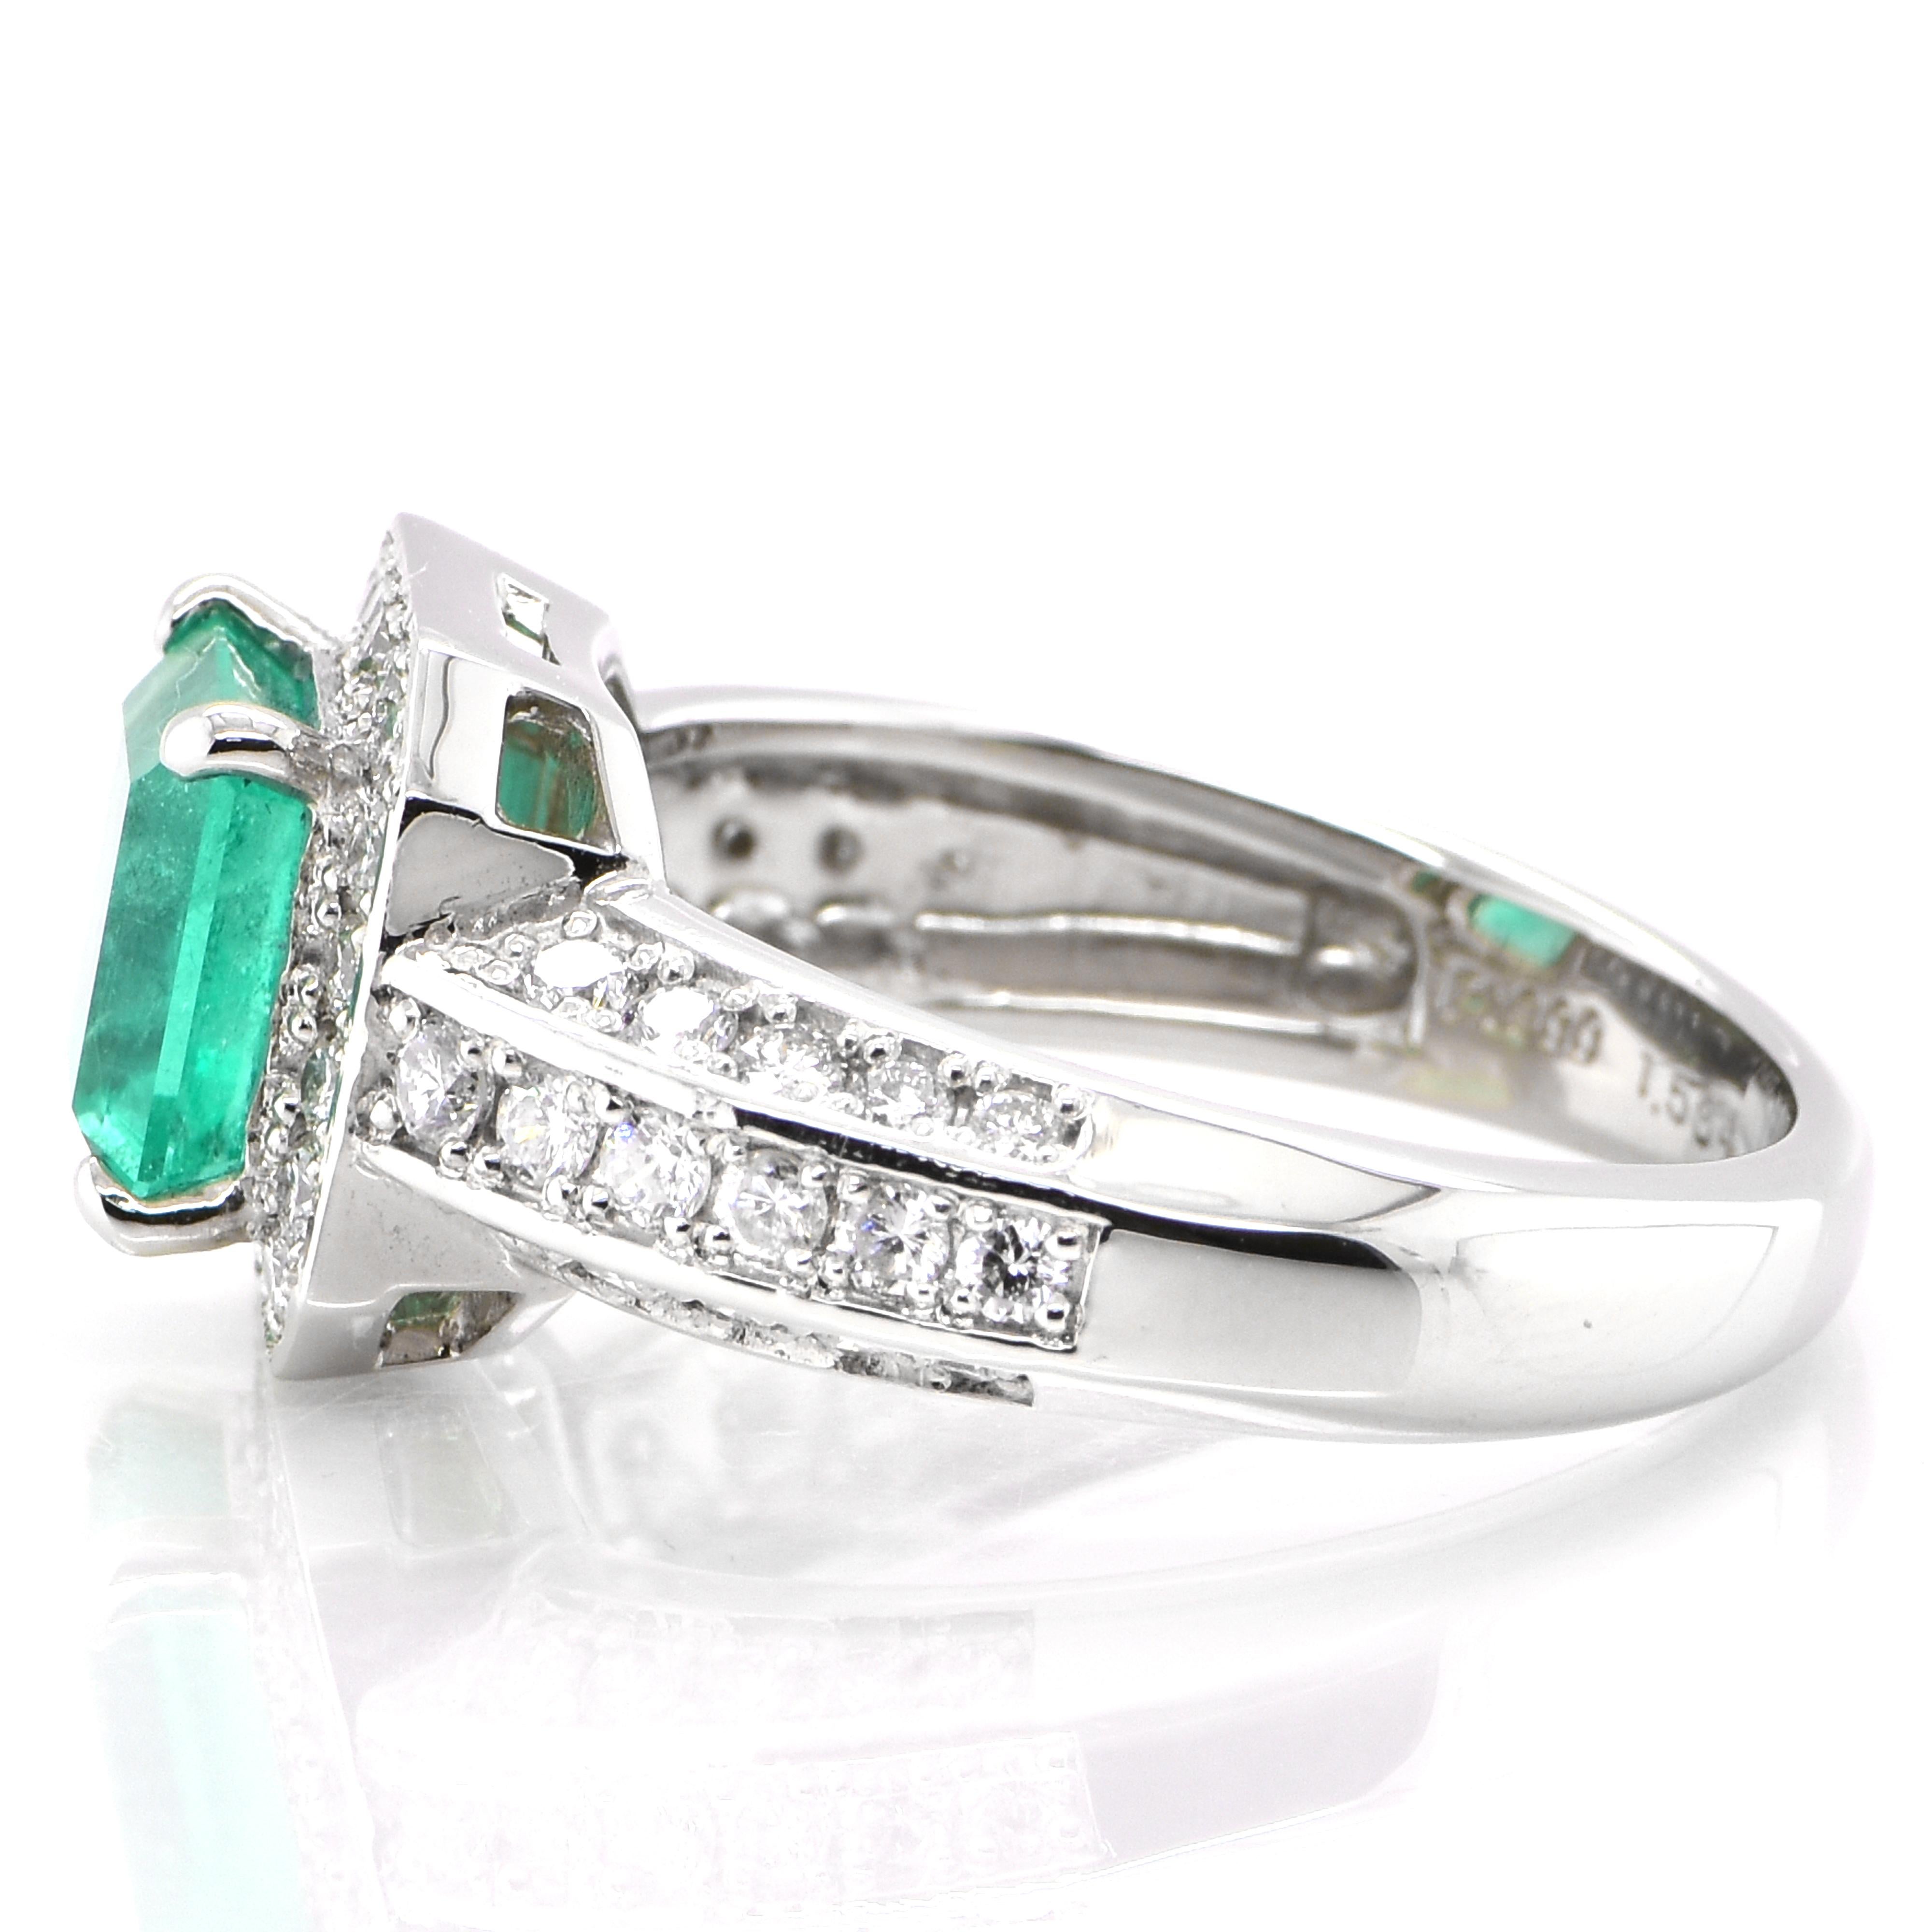 Emerald Cut 1.58 Carat Natural Colombian Emerald and Diamond Ring Set in Platinum For Sale